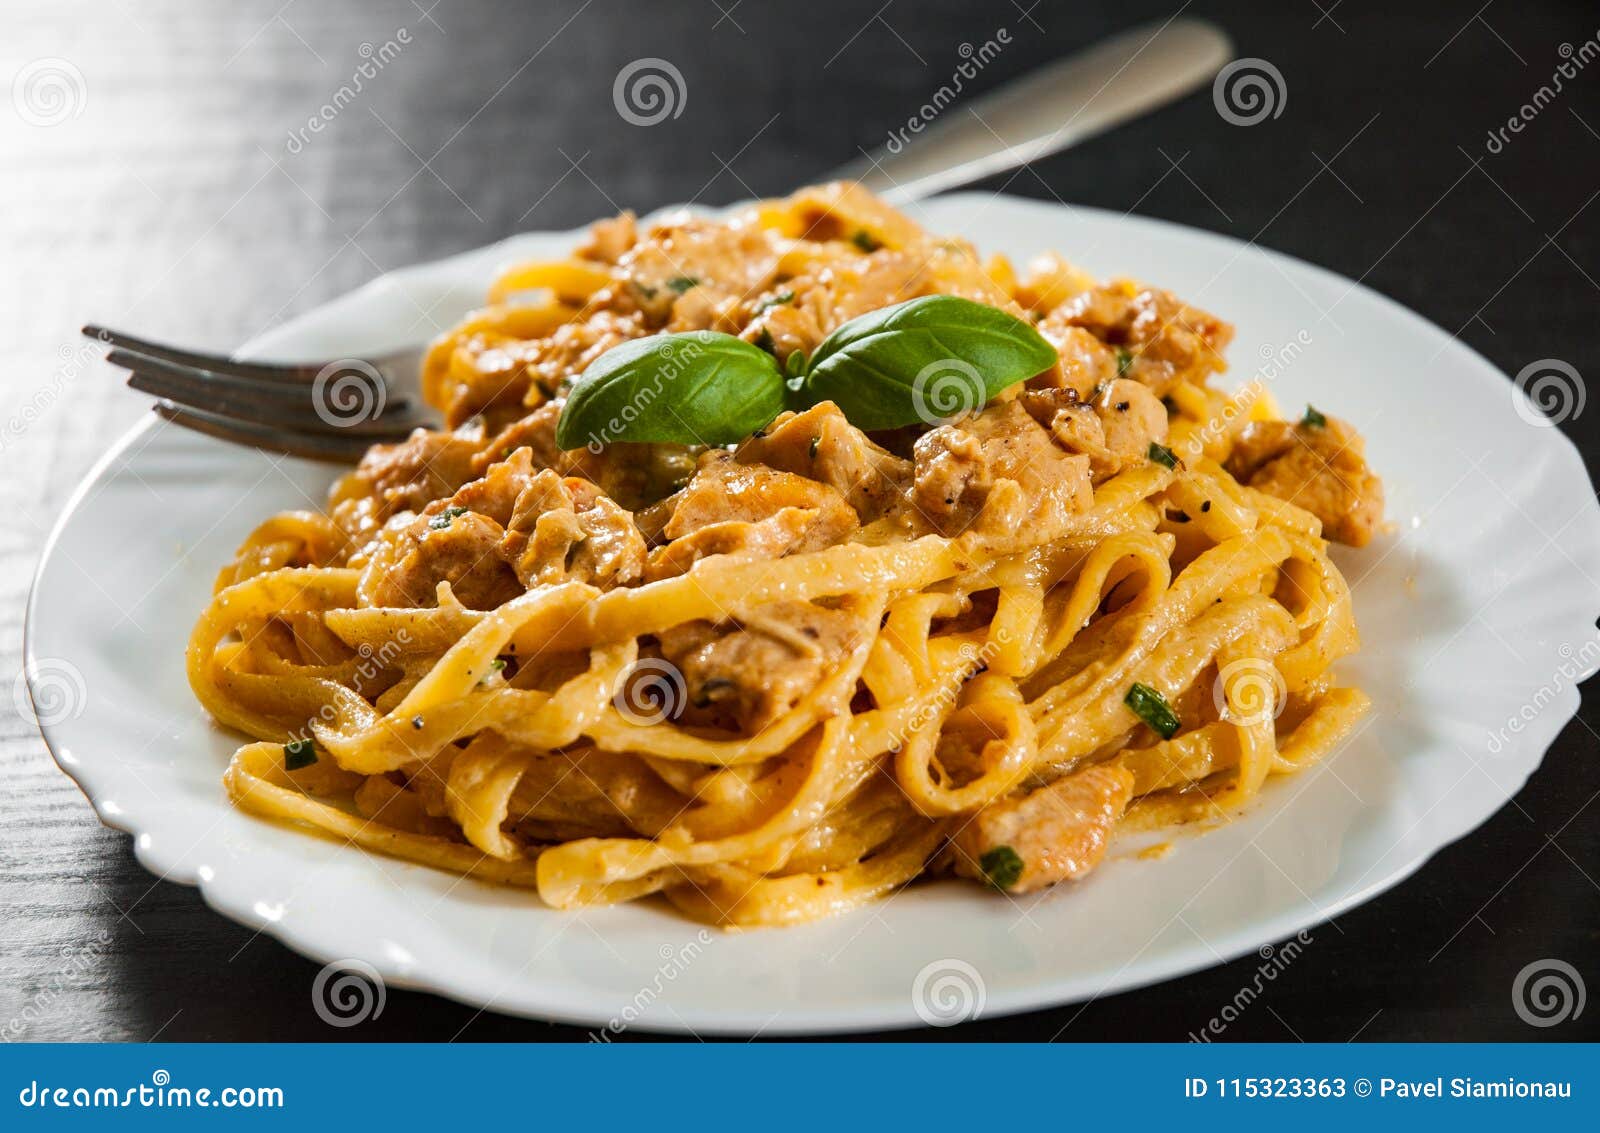 sliced fried chicken breast meat in a creamy sauce with bavette pasta in a plate